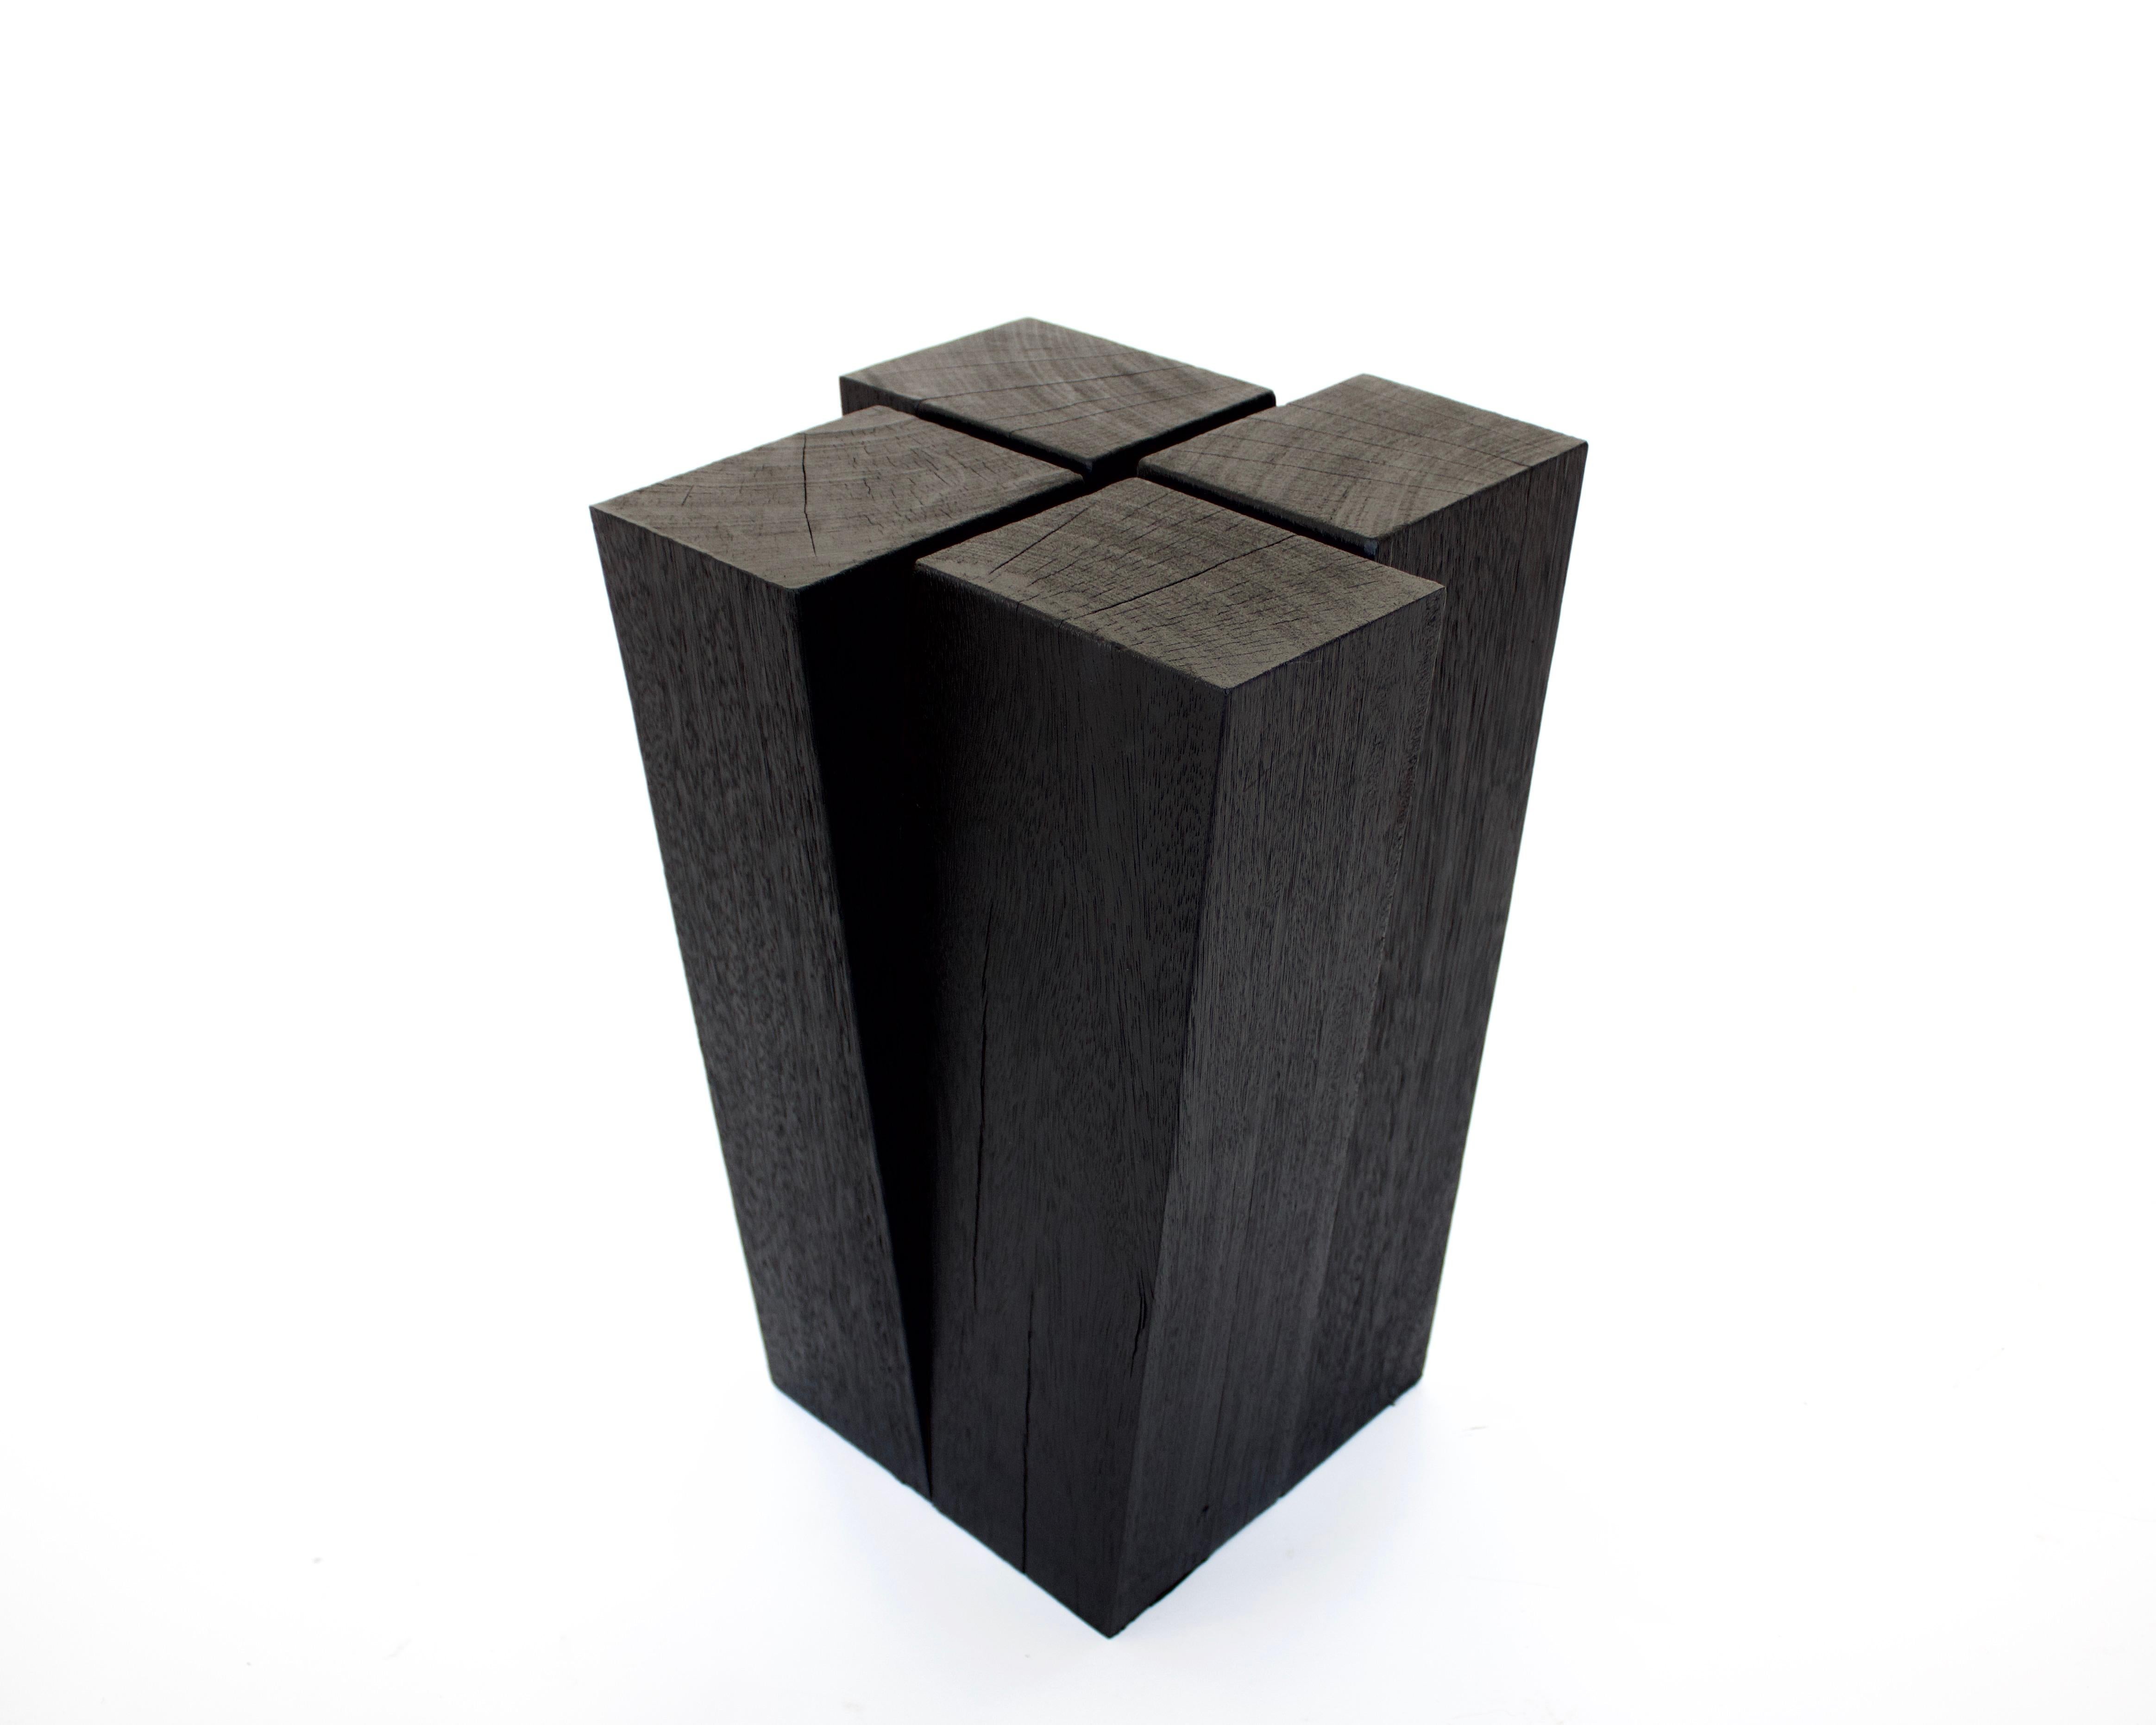 Arno Declercq Belgian oak wood four legs stool may be used as a side table or a stool.
Arno Declercq is a Belgian designer and art dealer born in 1994 who makes bespoke objects for interiors with passion for design, atmosphere, history and